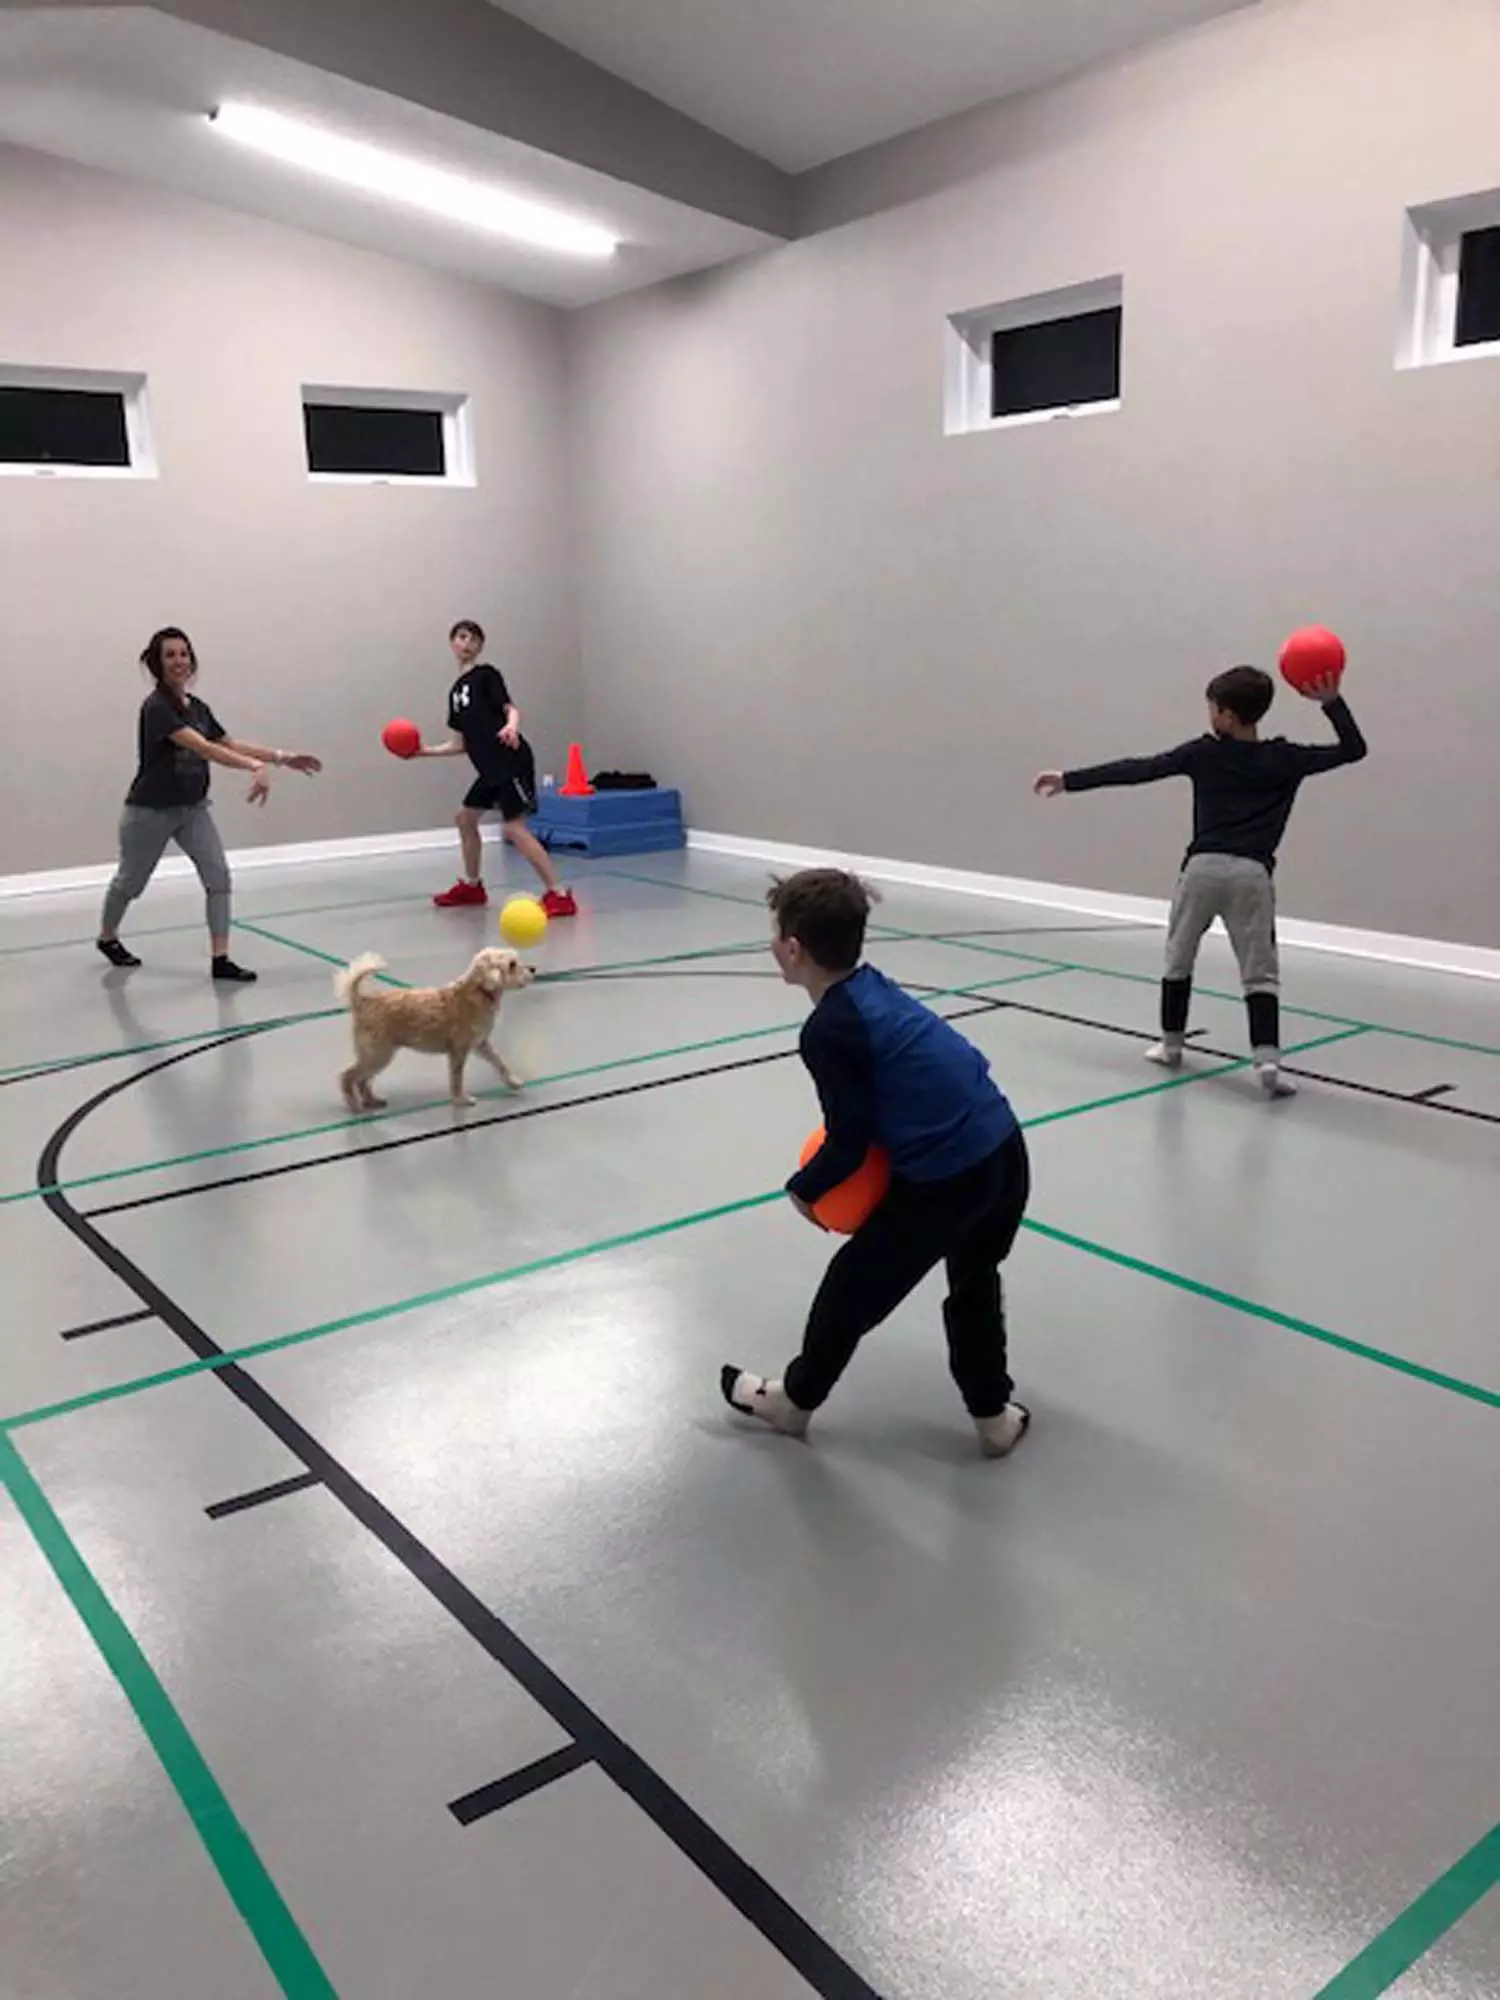 Kids and Dog Playing in Indoor Sports Room®